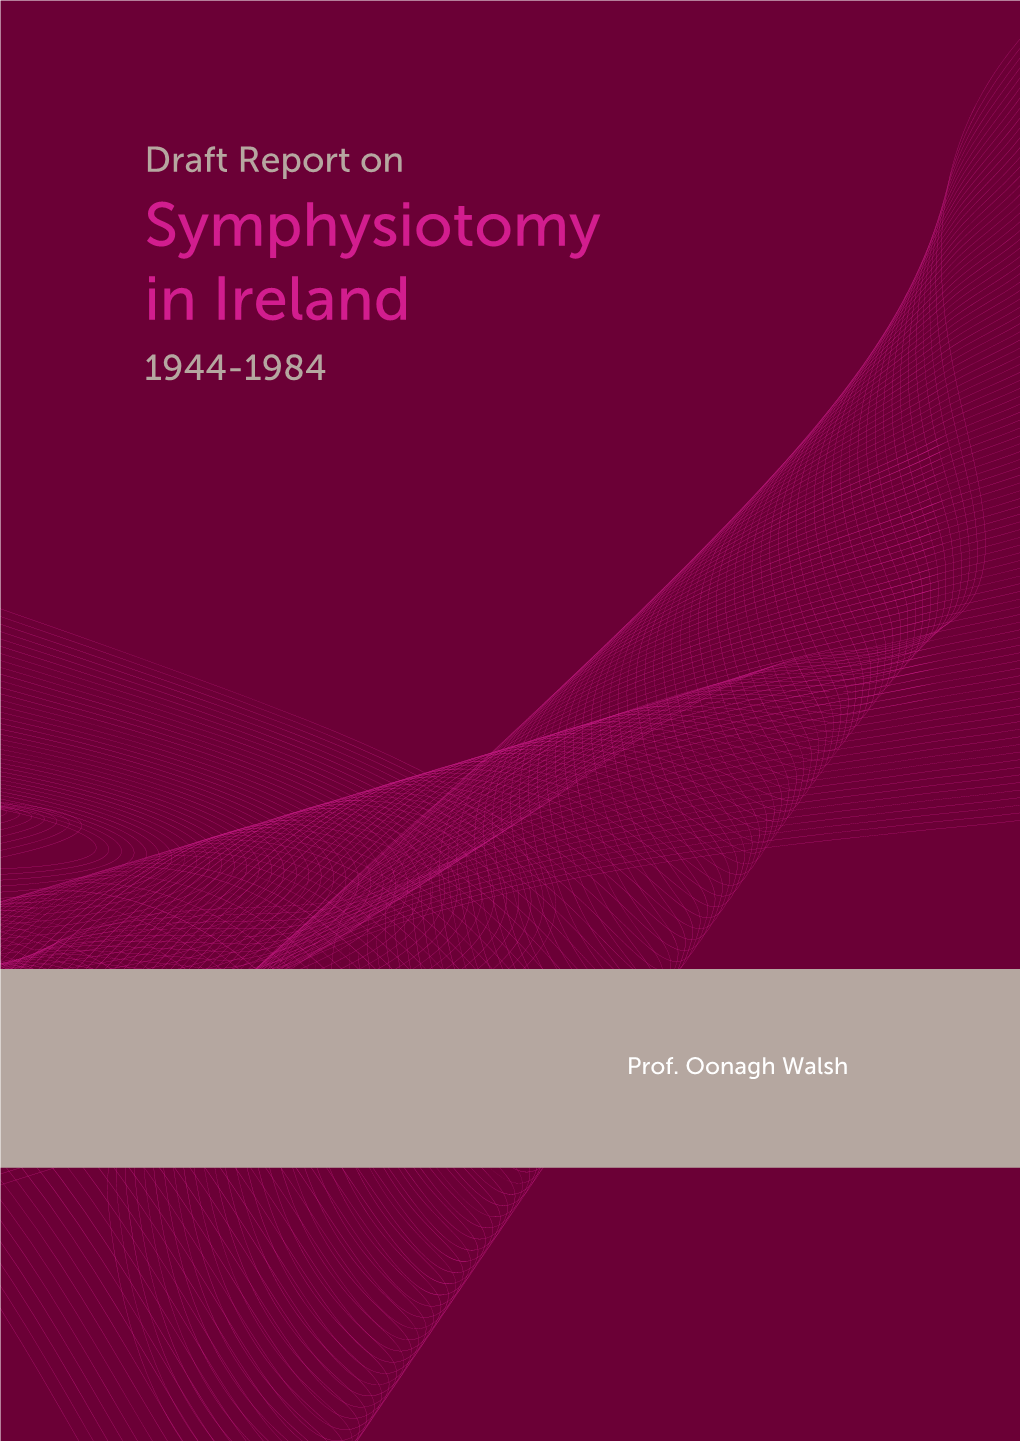 Draft Report on Symphysiotomy in Ireland from 1944 to 1984